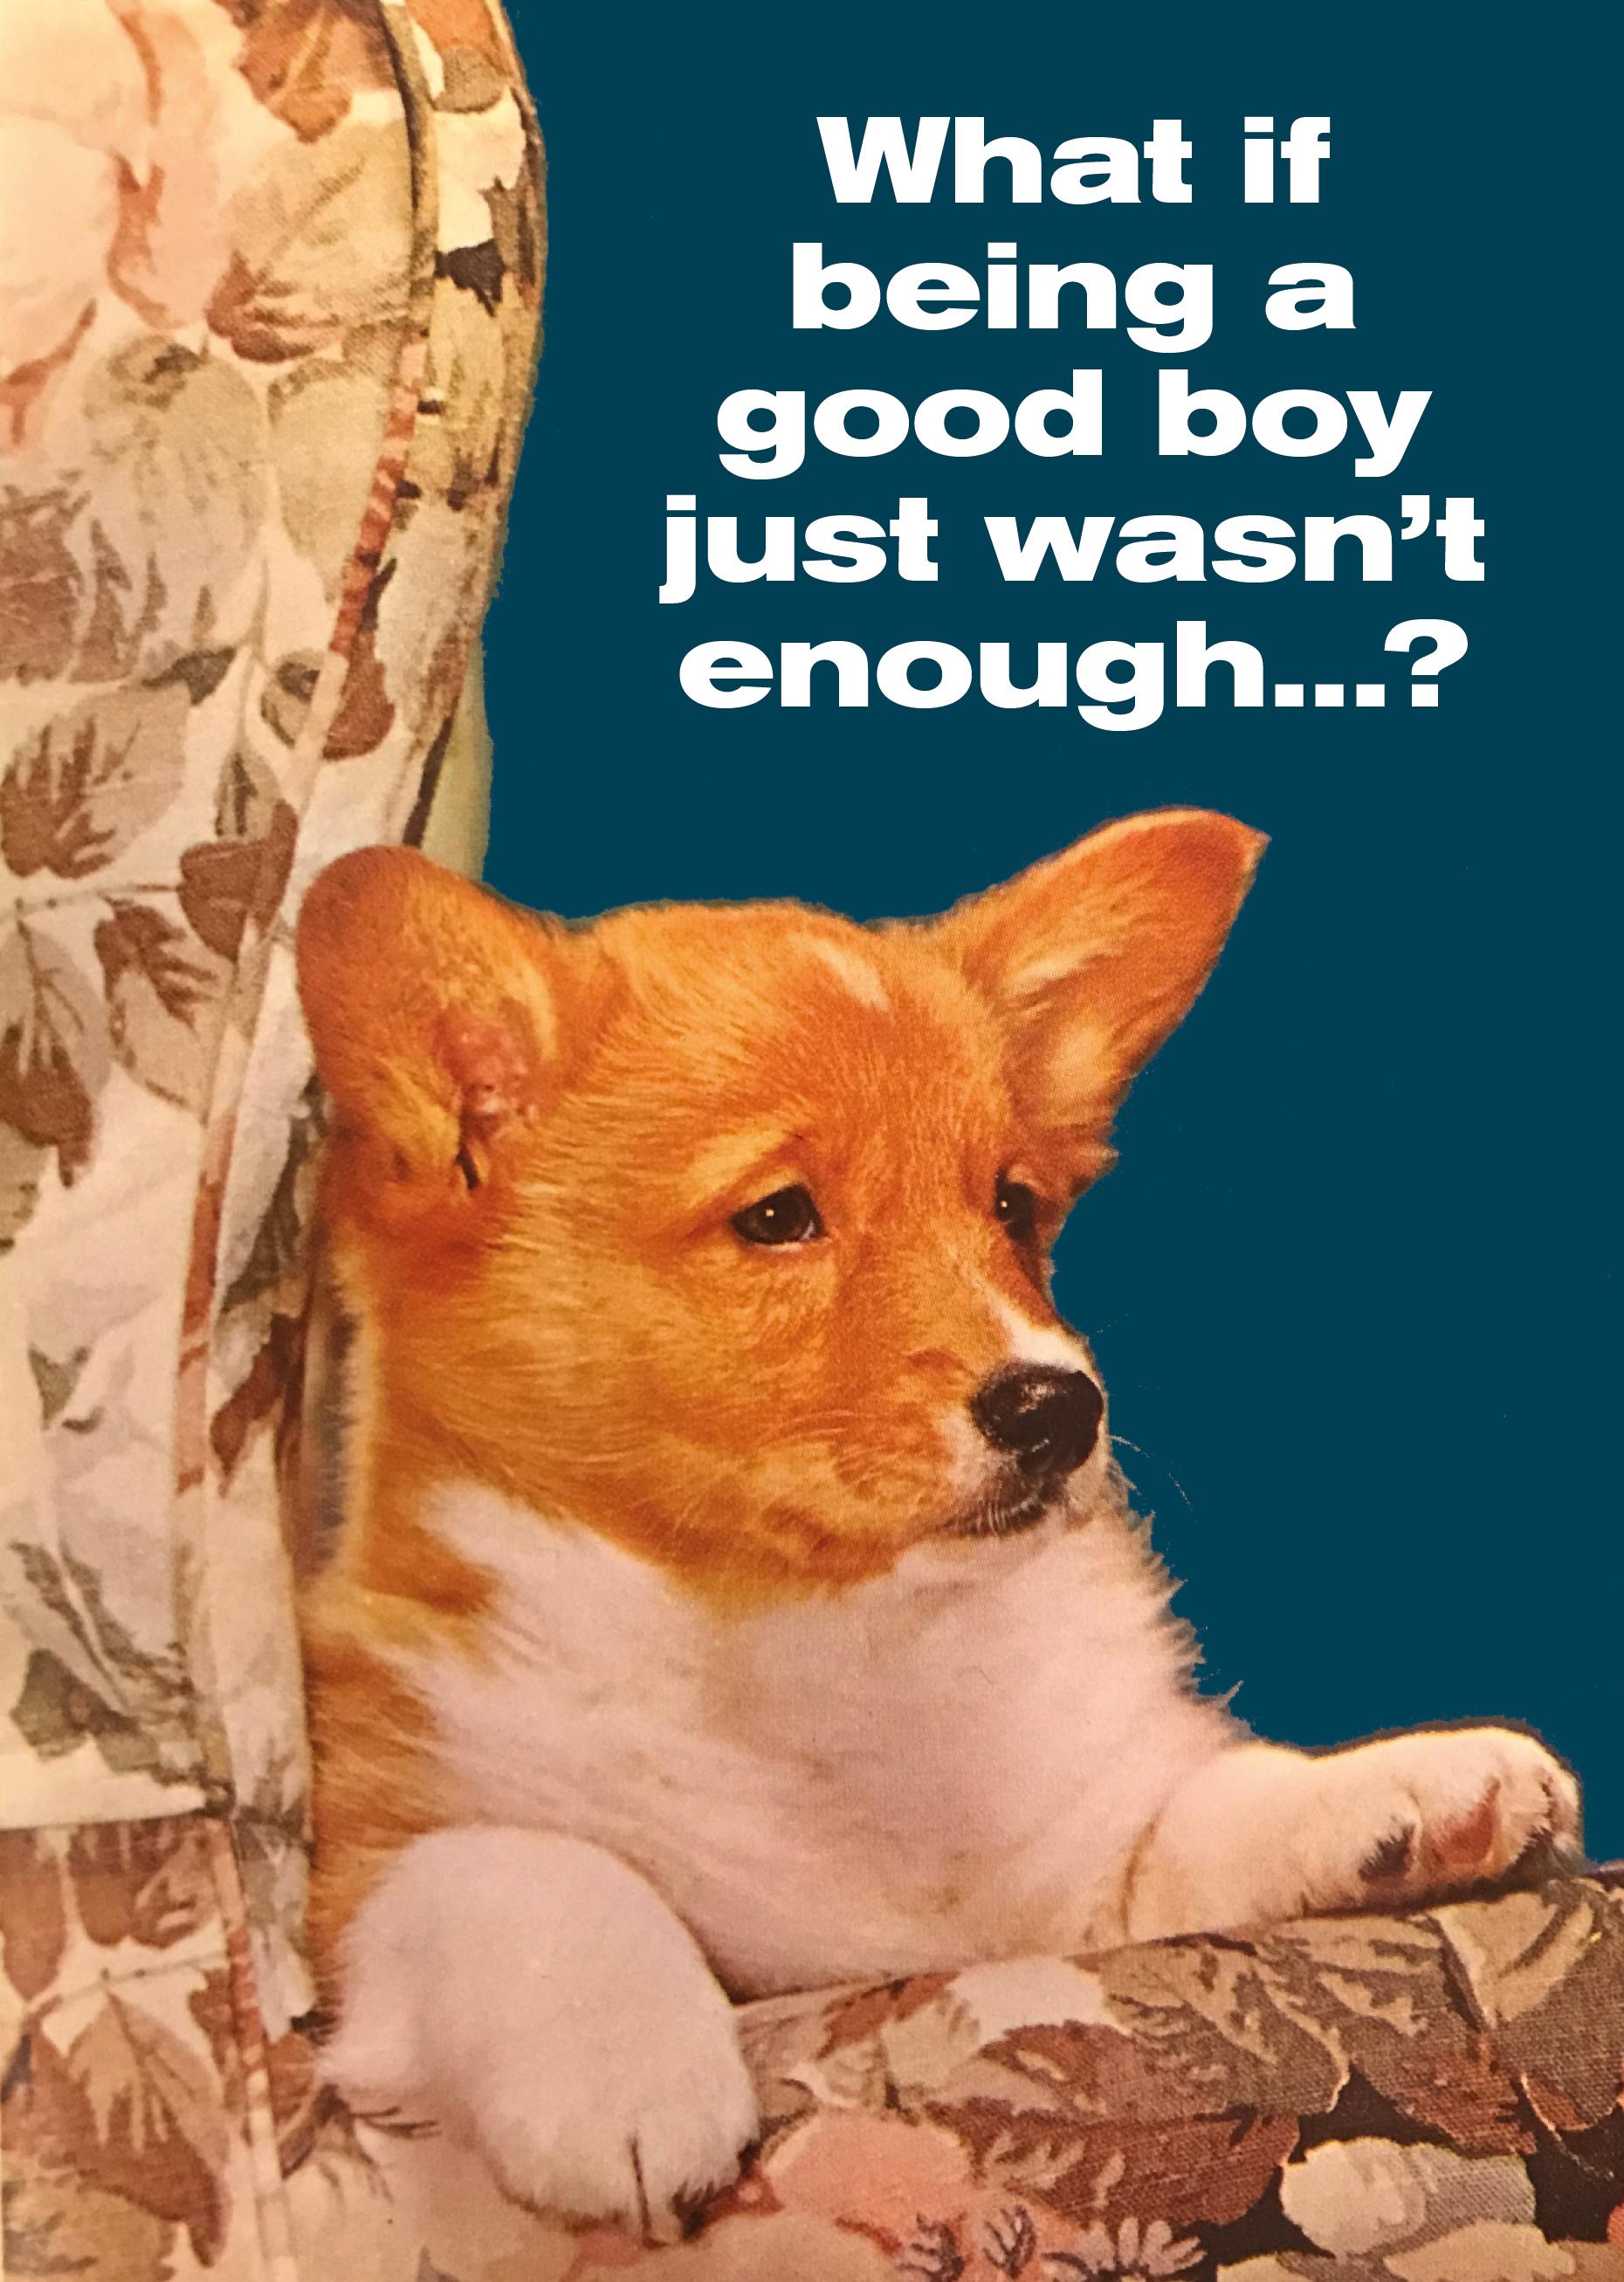 What if being a good boy just wasn't enough..?